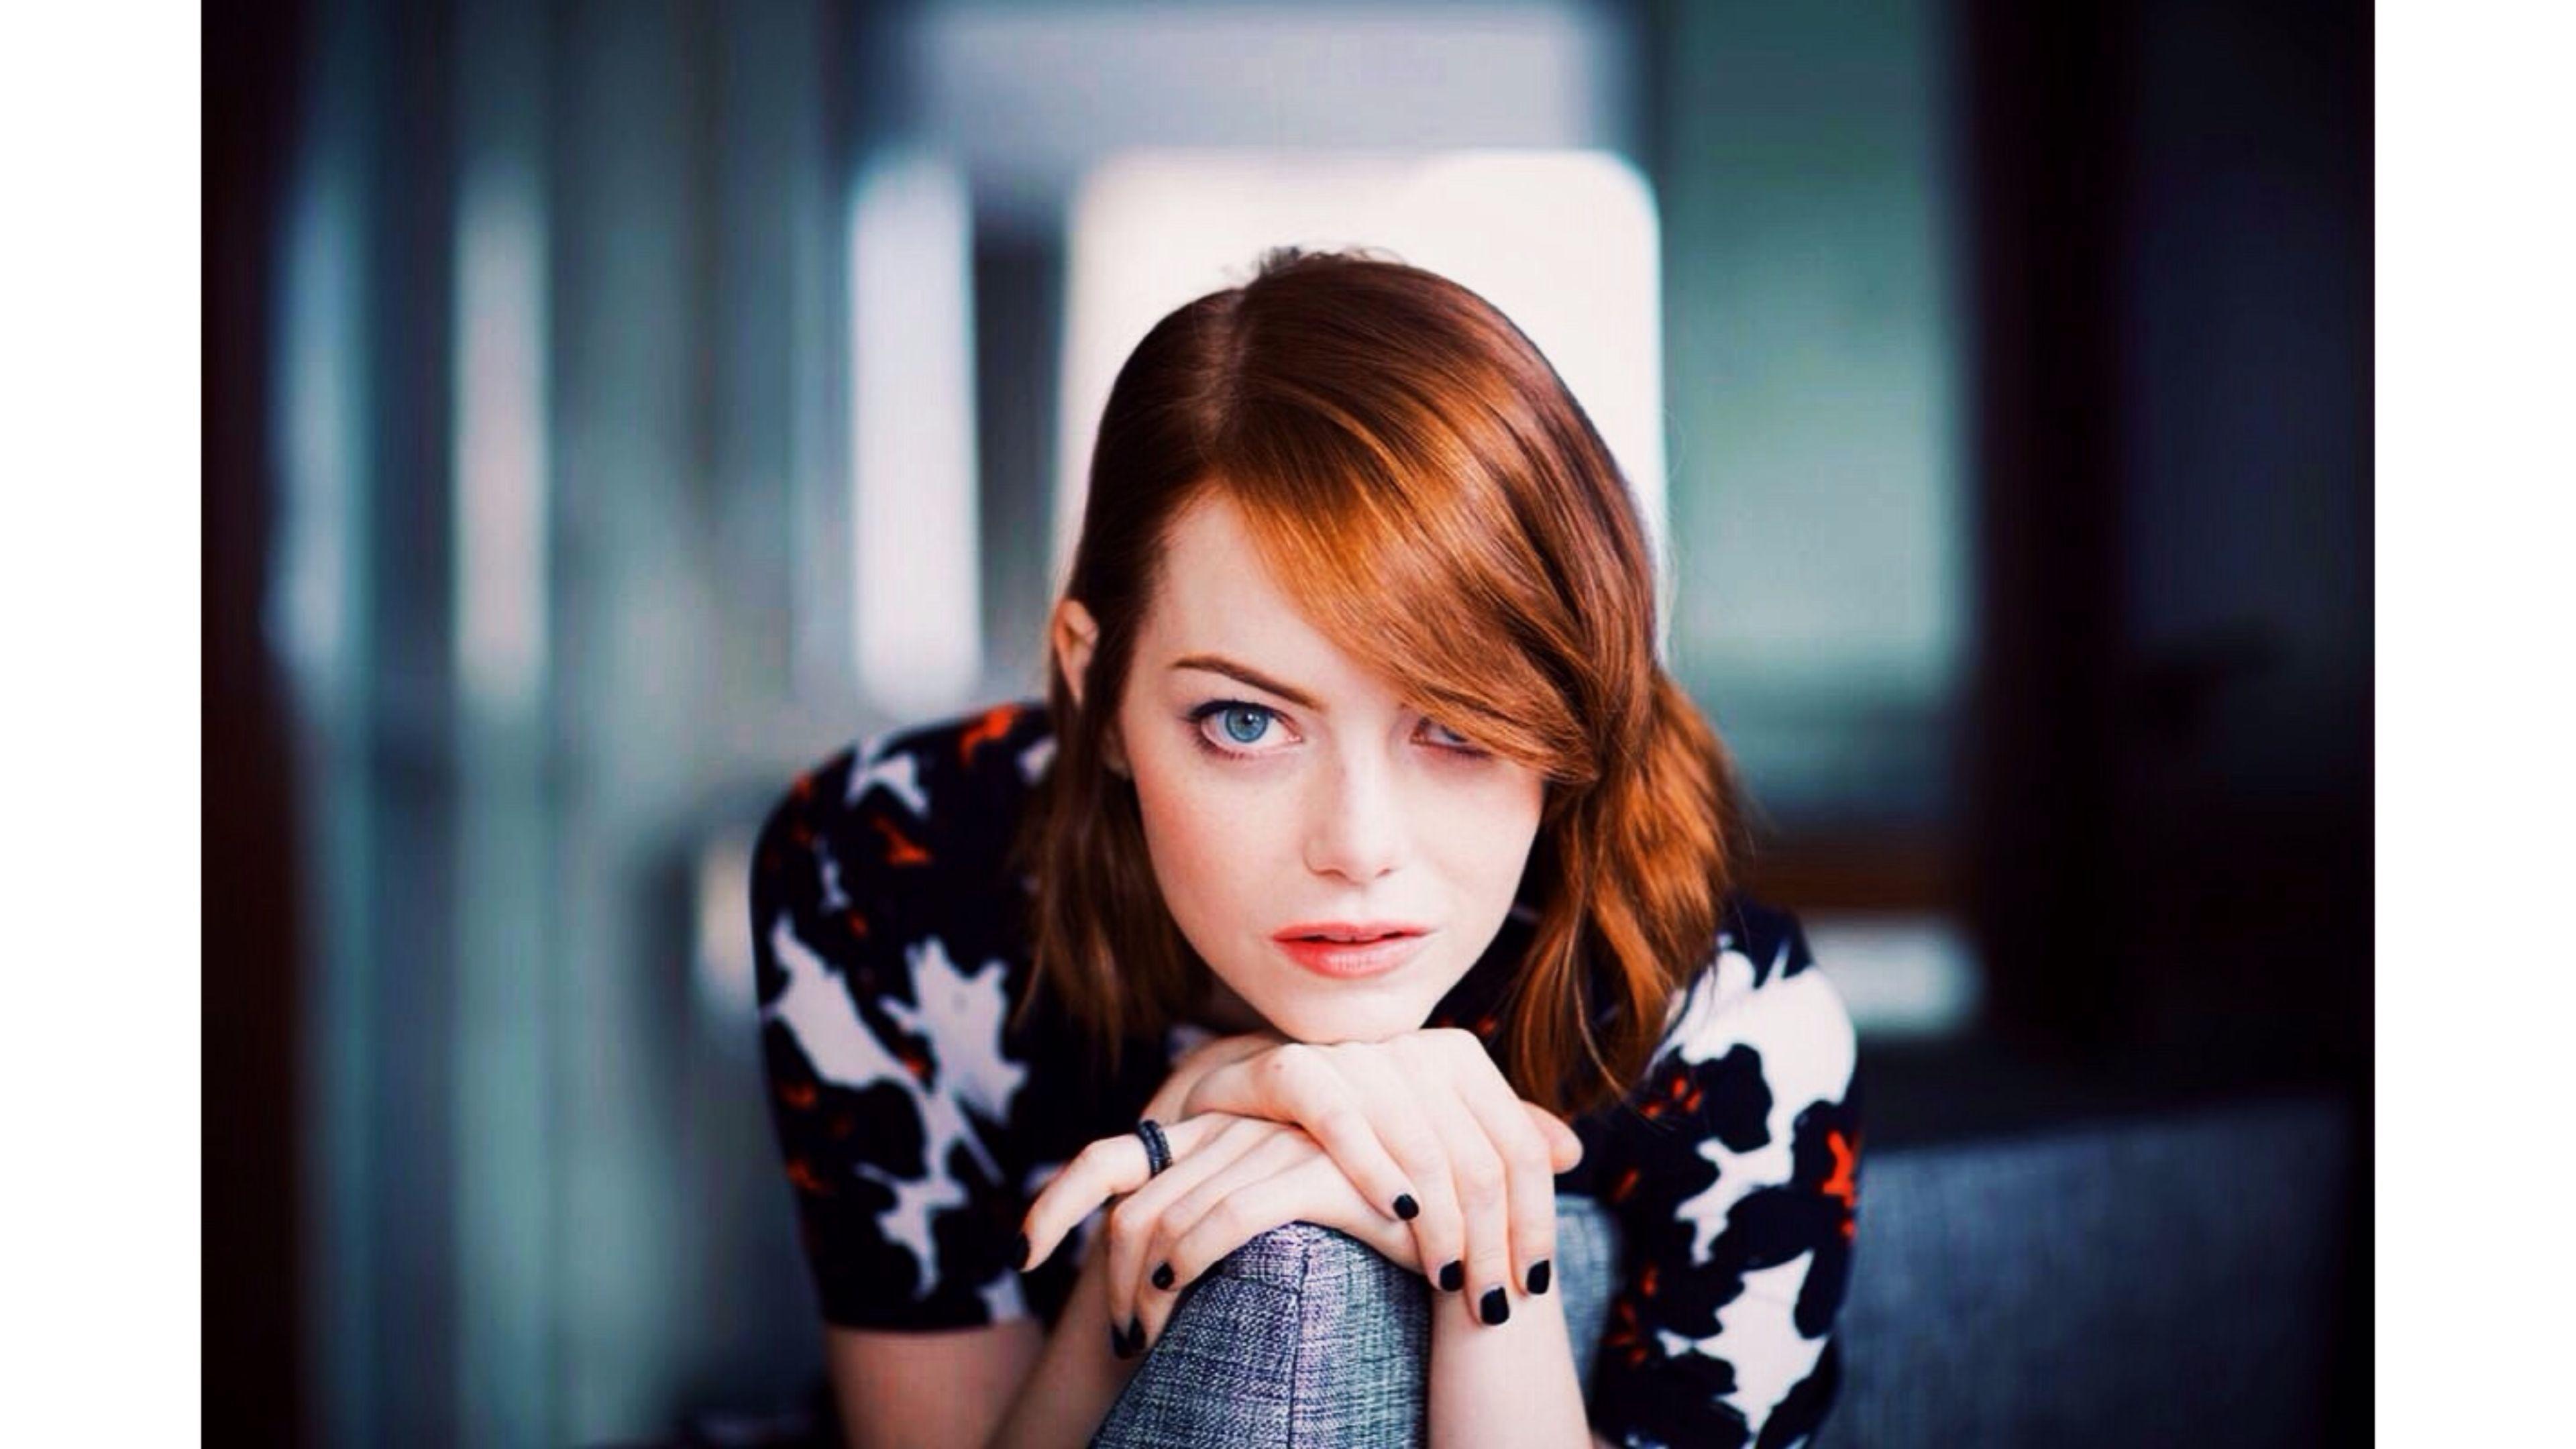 Emma Stone HQ Wallpapers  Emma Stone Wallpapers  17622  Oneindia  Wallpapers